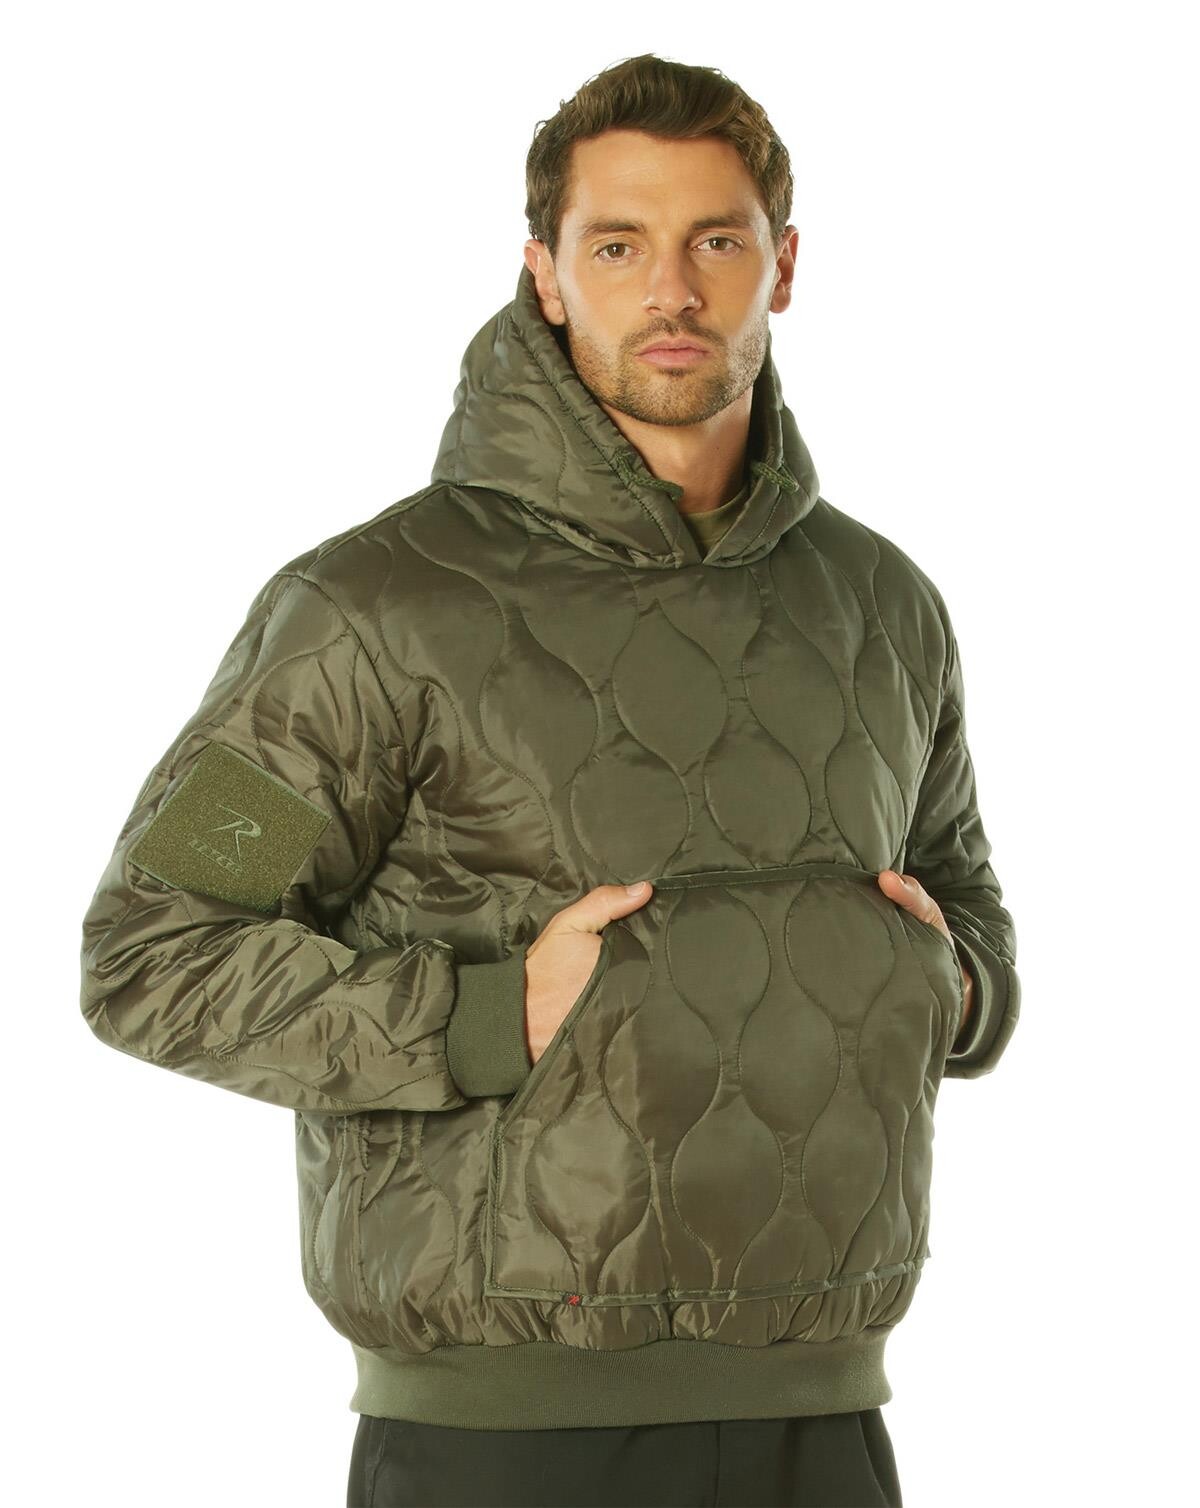 4: Rothco Quilted Woobie Hooded Sweatshirt (Oliven, M)